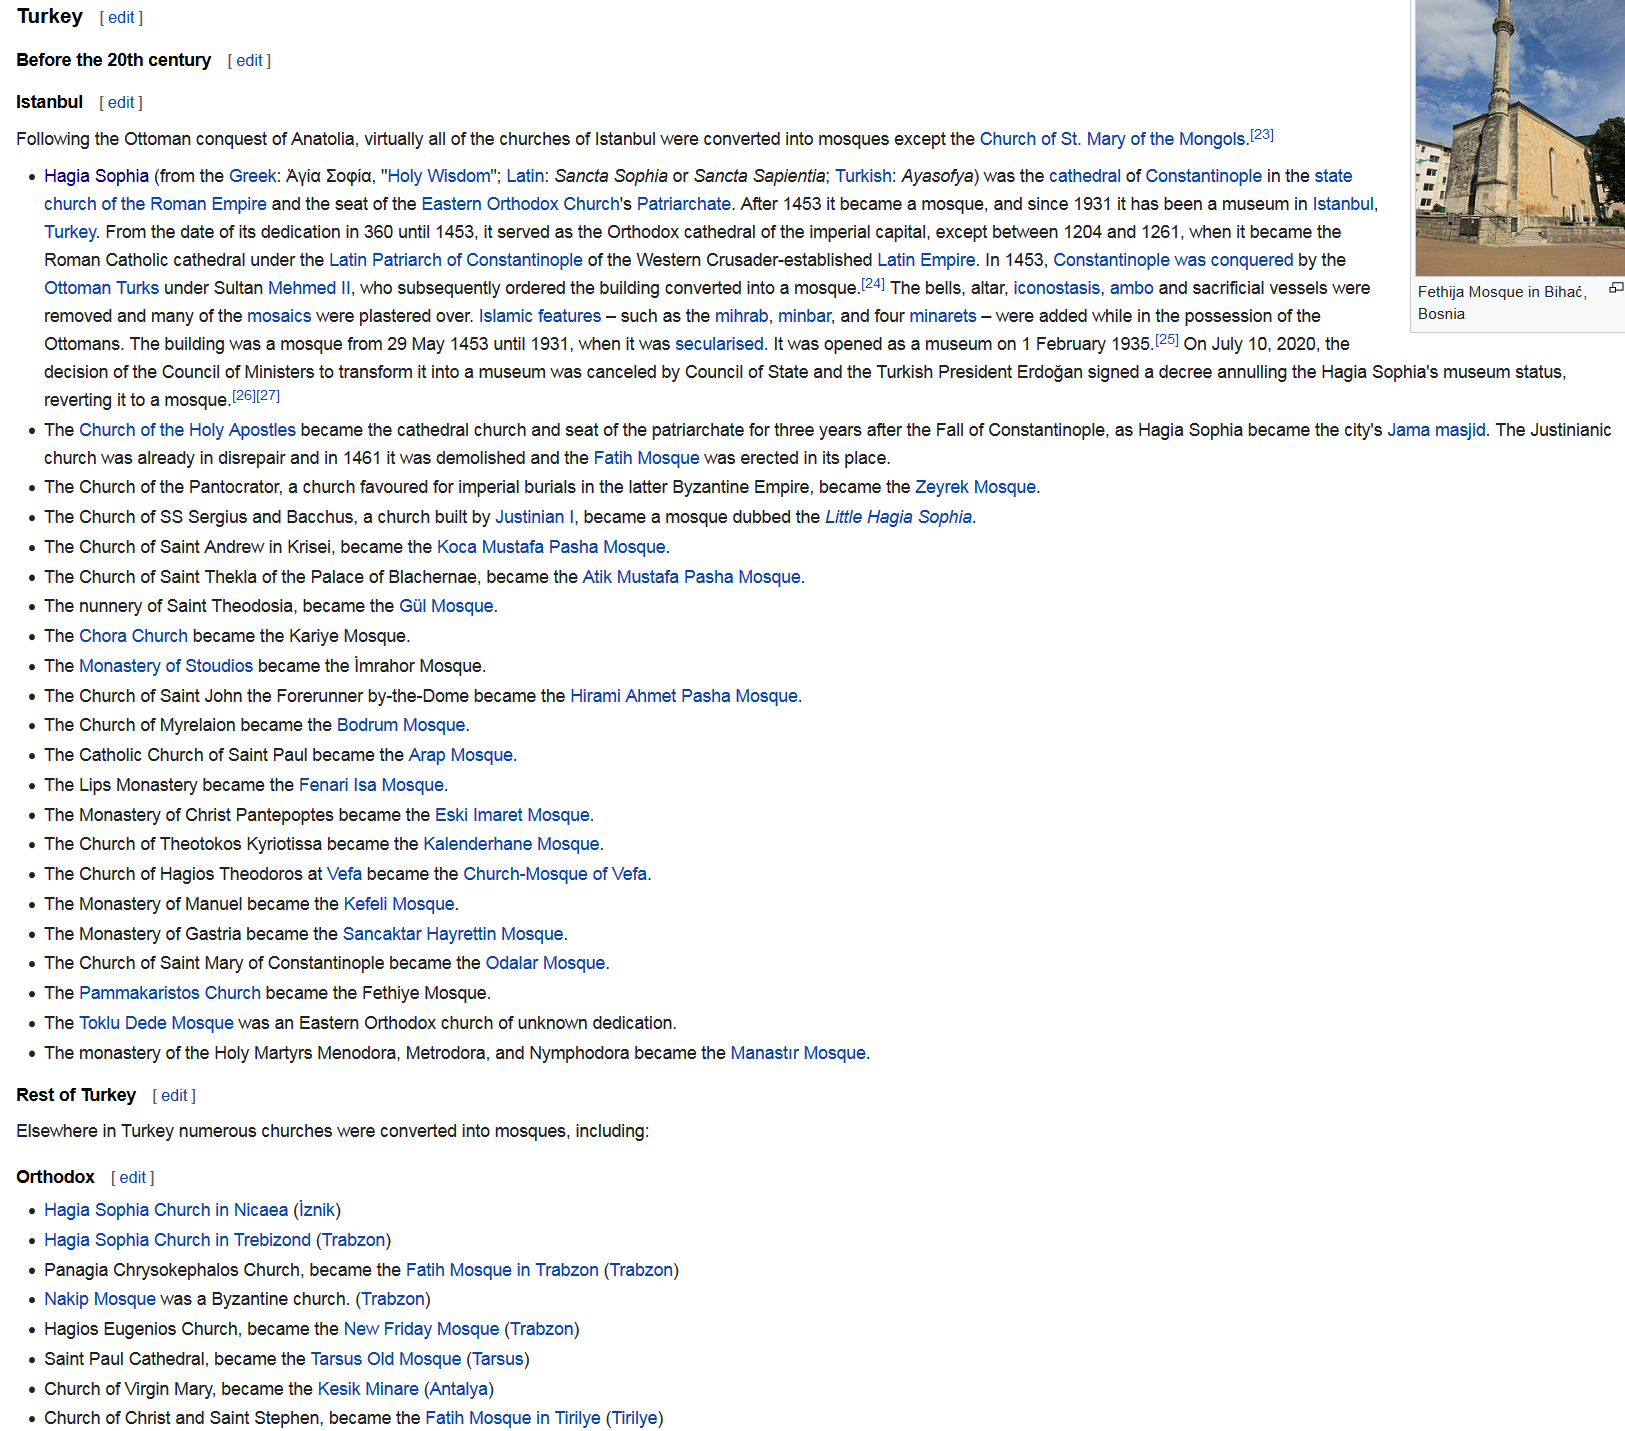 Screenshot_2022-04-06 Conversion of non-Islamic places of worship into mosques - Wikipedia.png